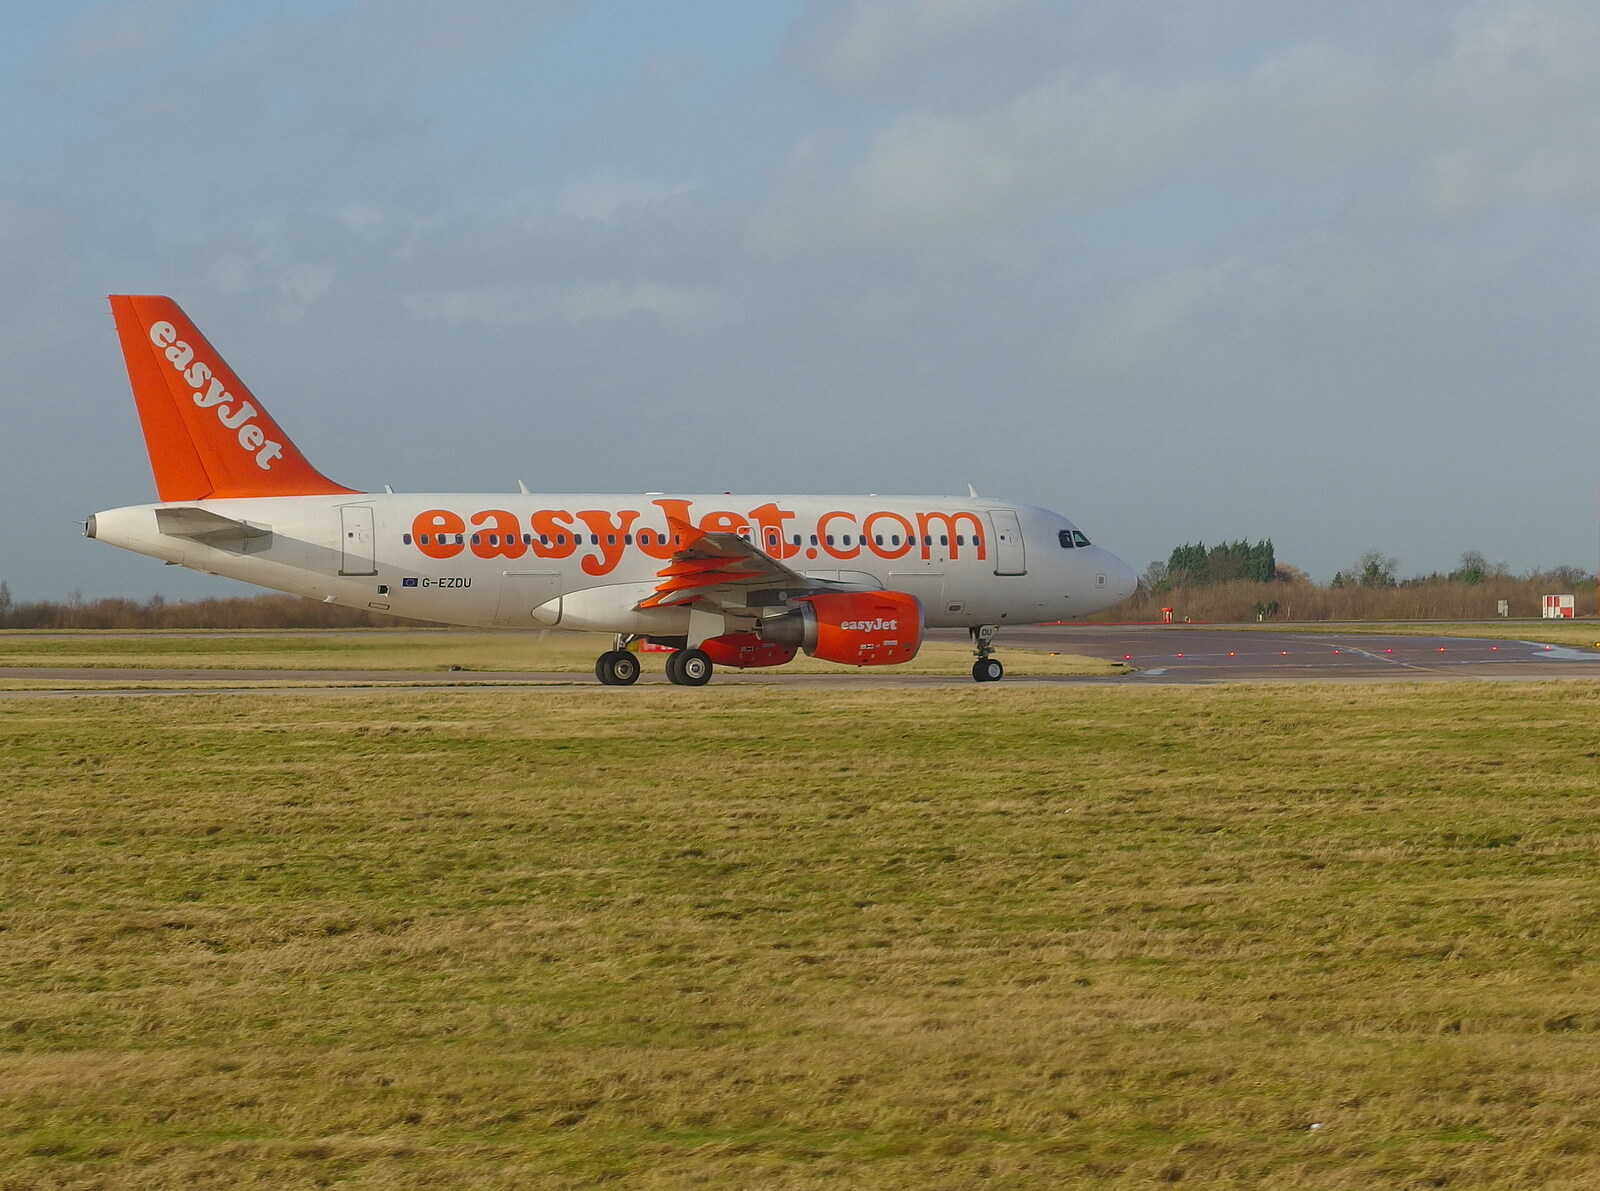 An EasyJet 737 from Dun Laoghaire and an Electrical Disaster, Monkstown, County Dublin, Ireland - 4th January 2014